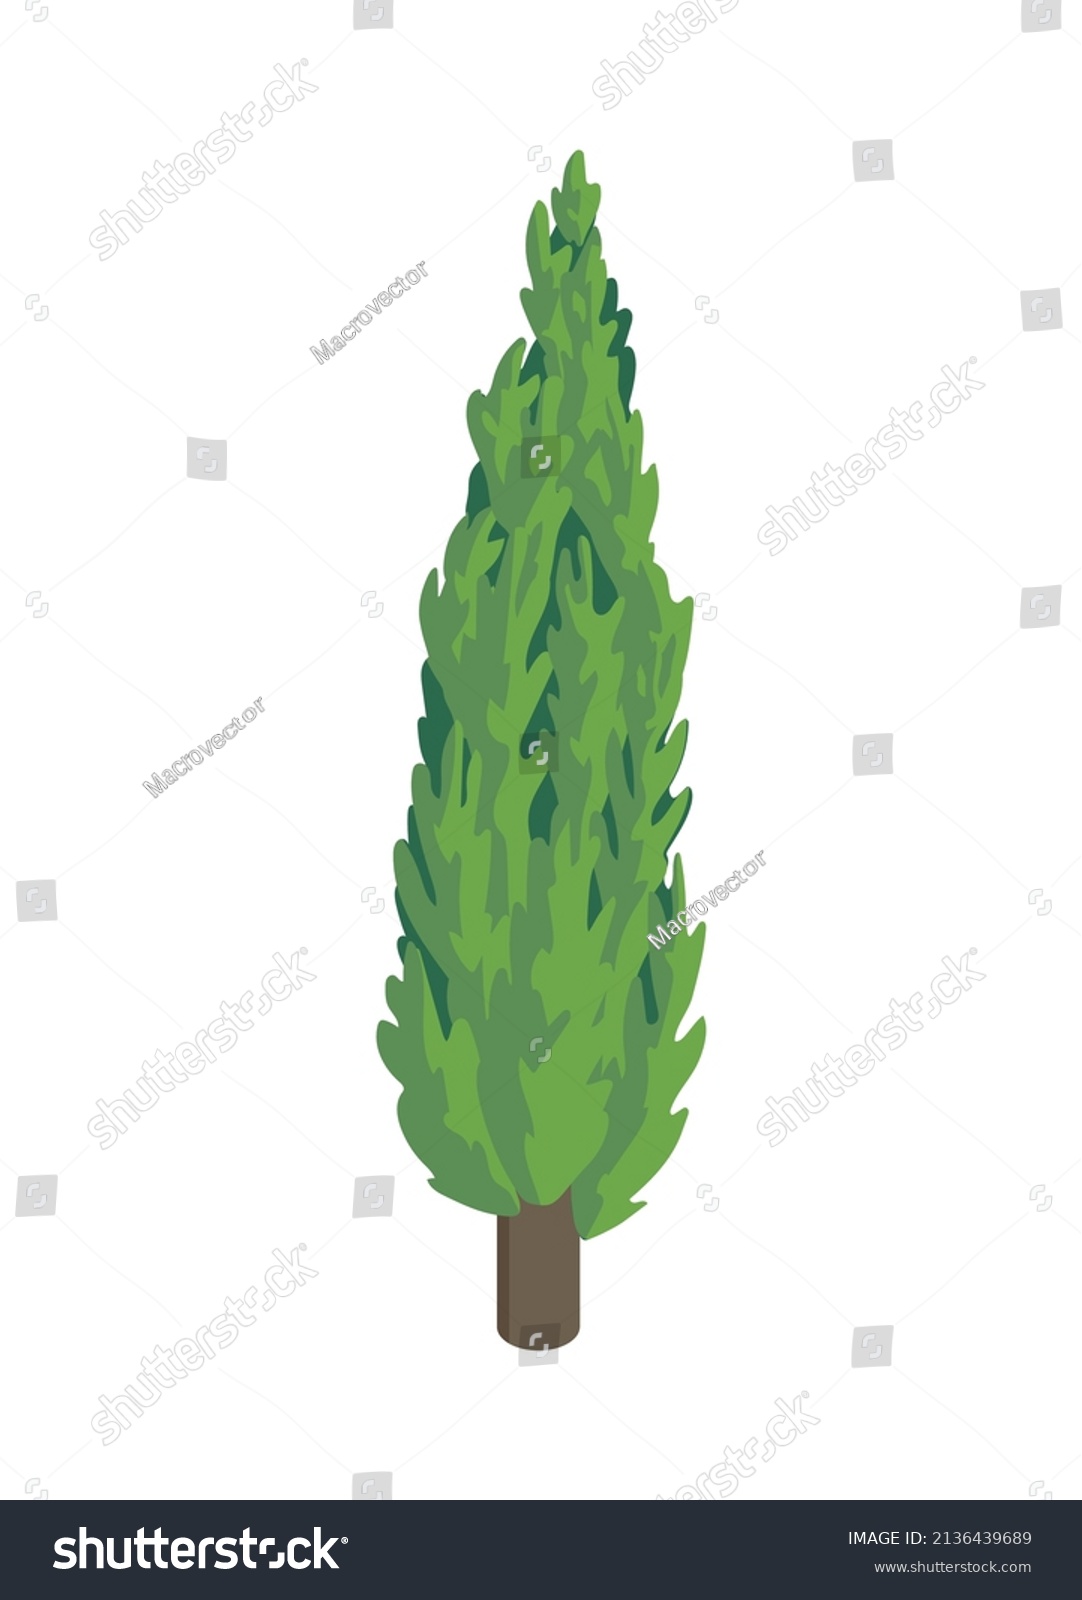 SVG of Isometric city park elements composition with isolated image of cypress tree on blank background vector illustration svg